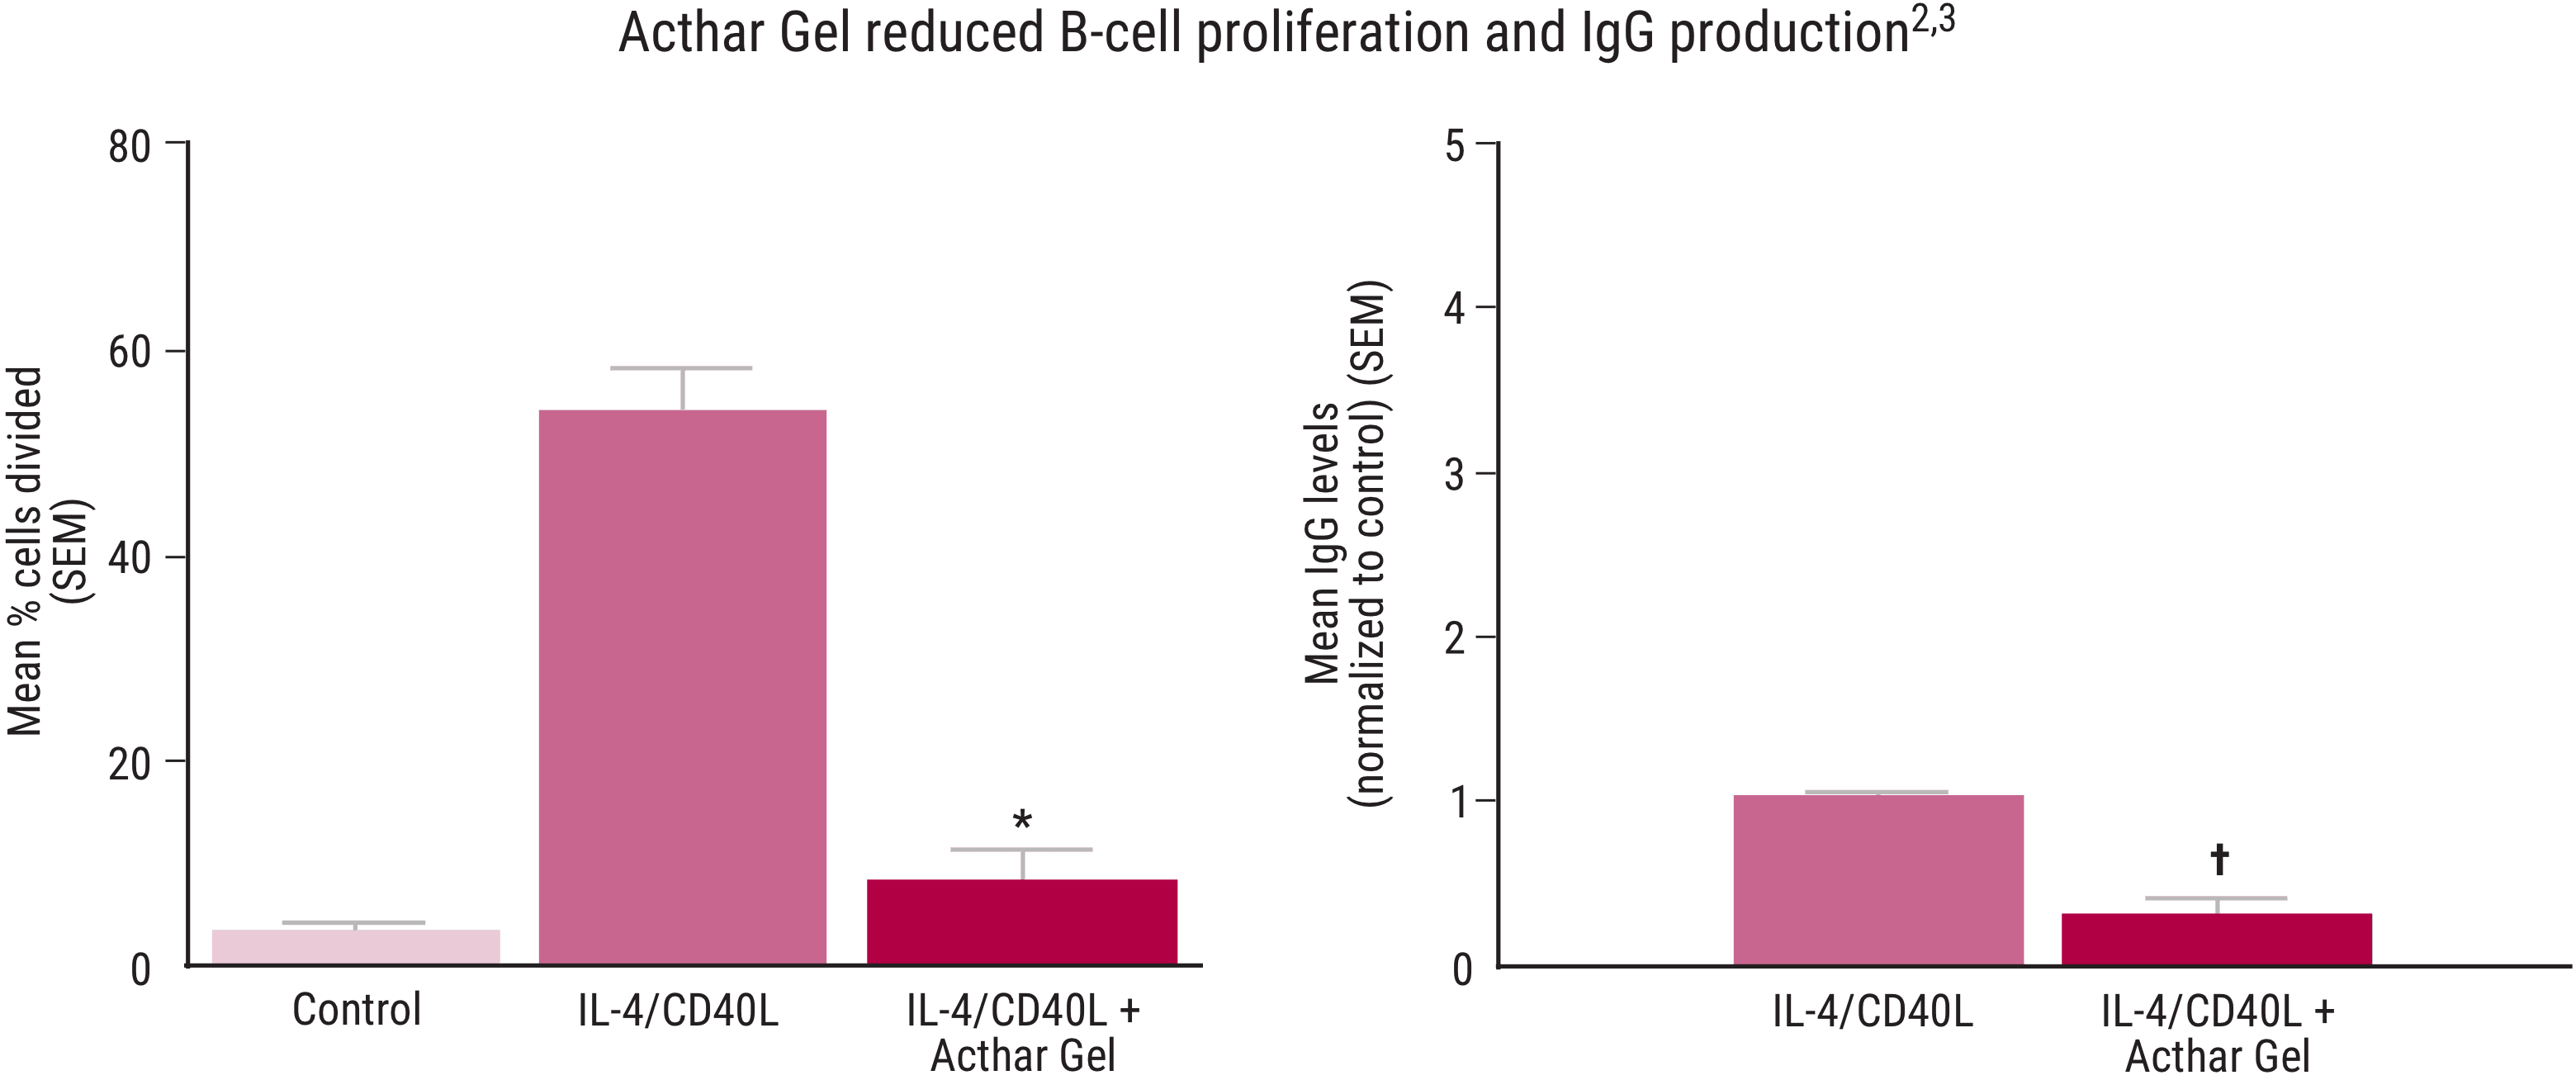 Acthar Gel: B-cell proliferation and IgG production